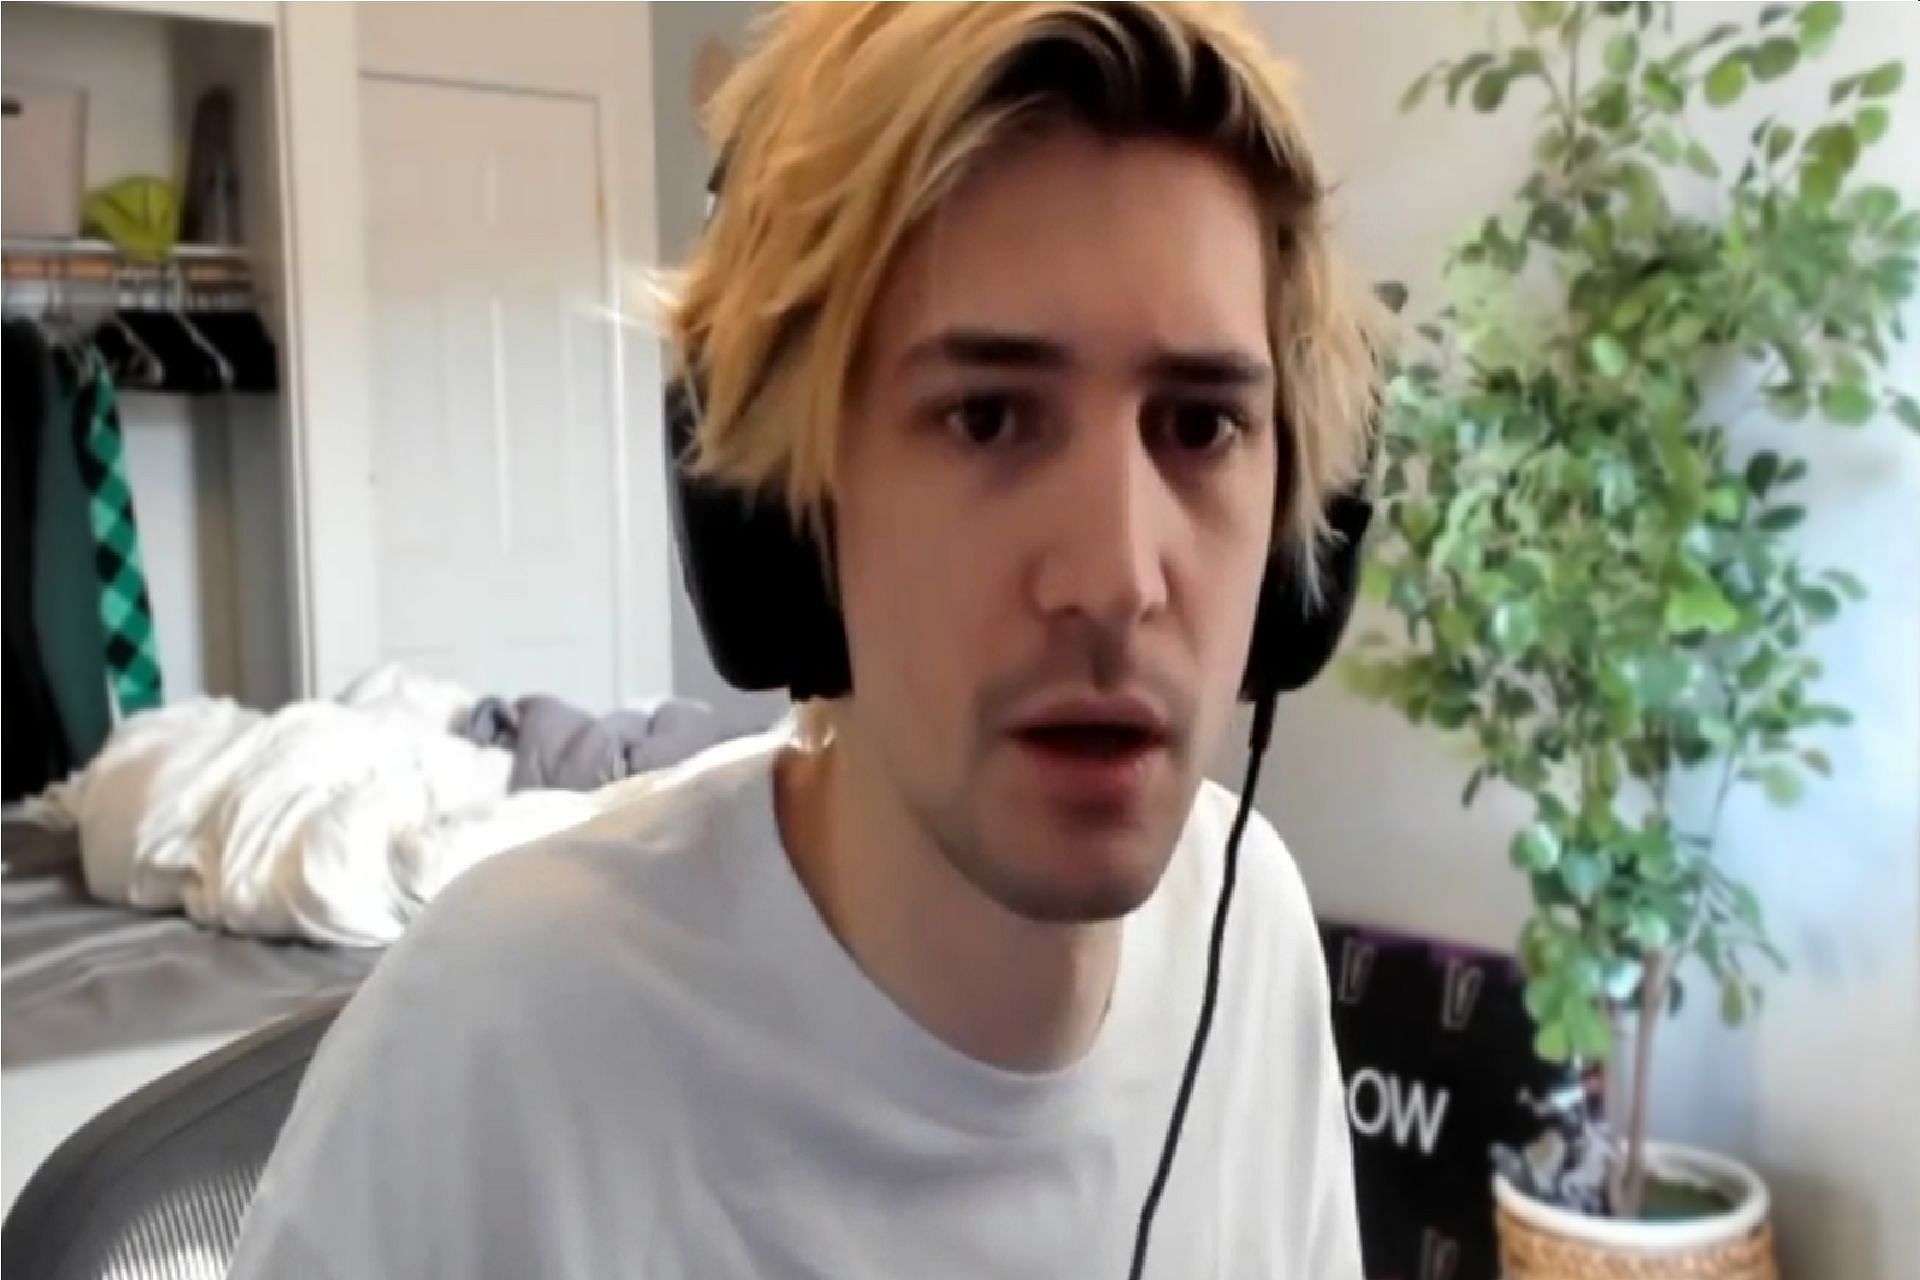 xQc reacts to SOTY nominees (Image via YouTube)